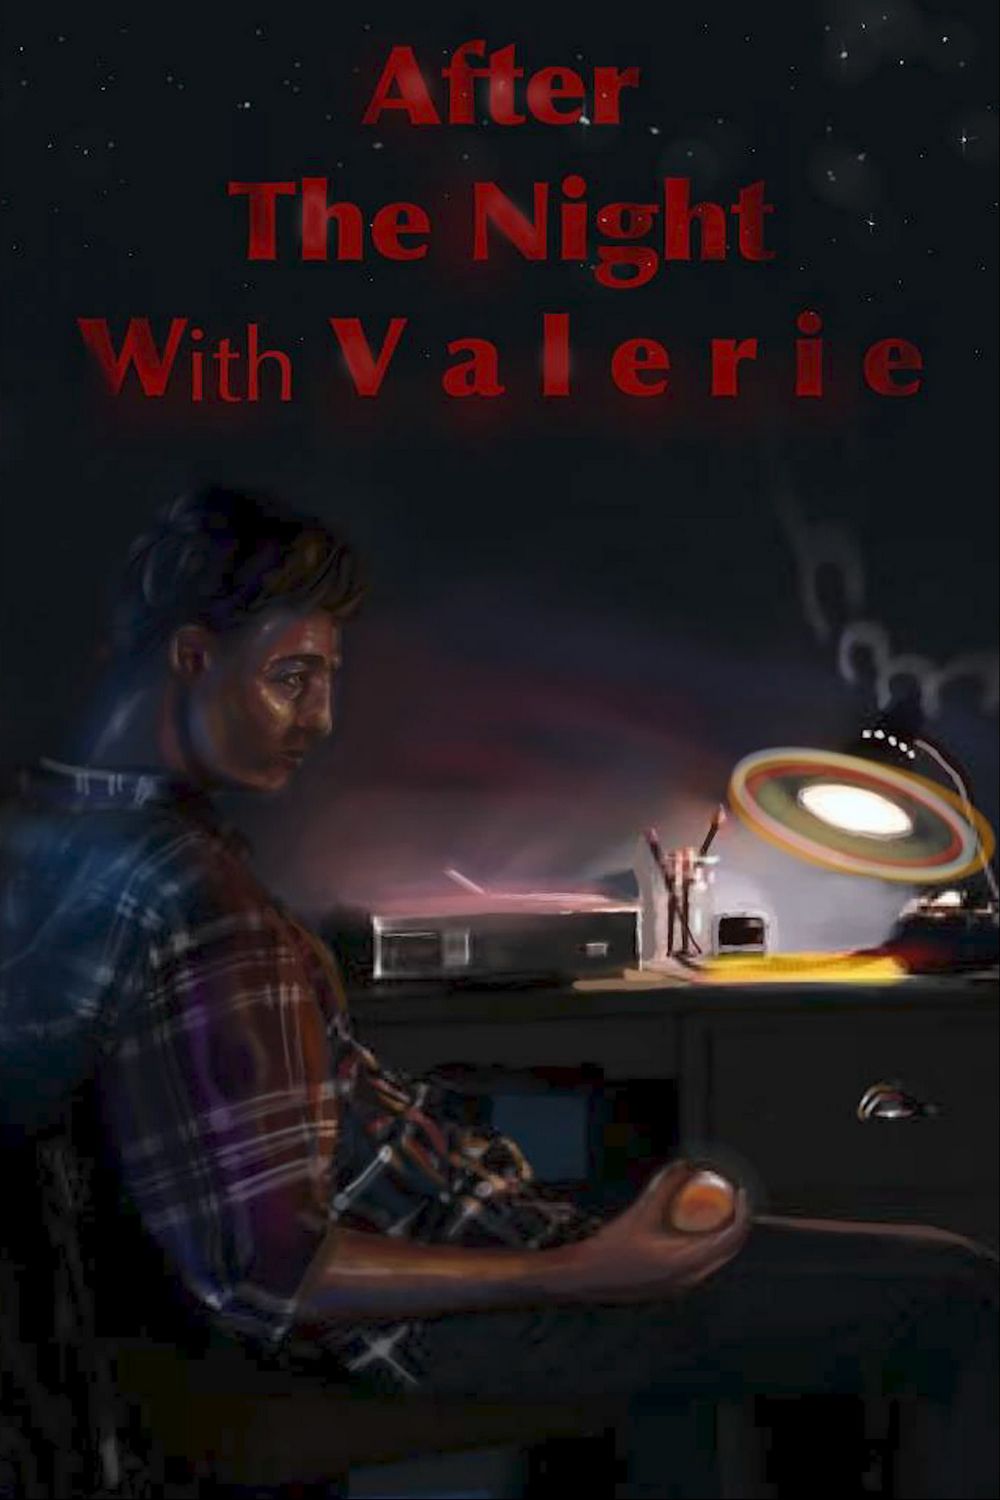 After the Night with Valerie poster.